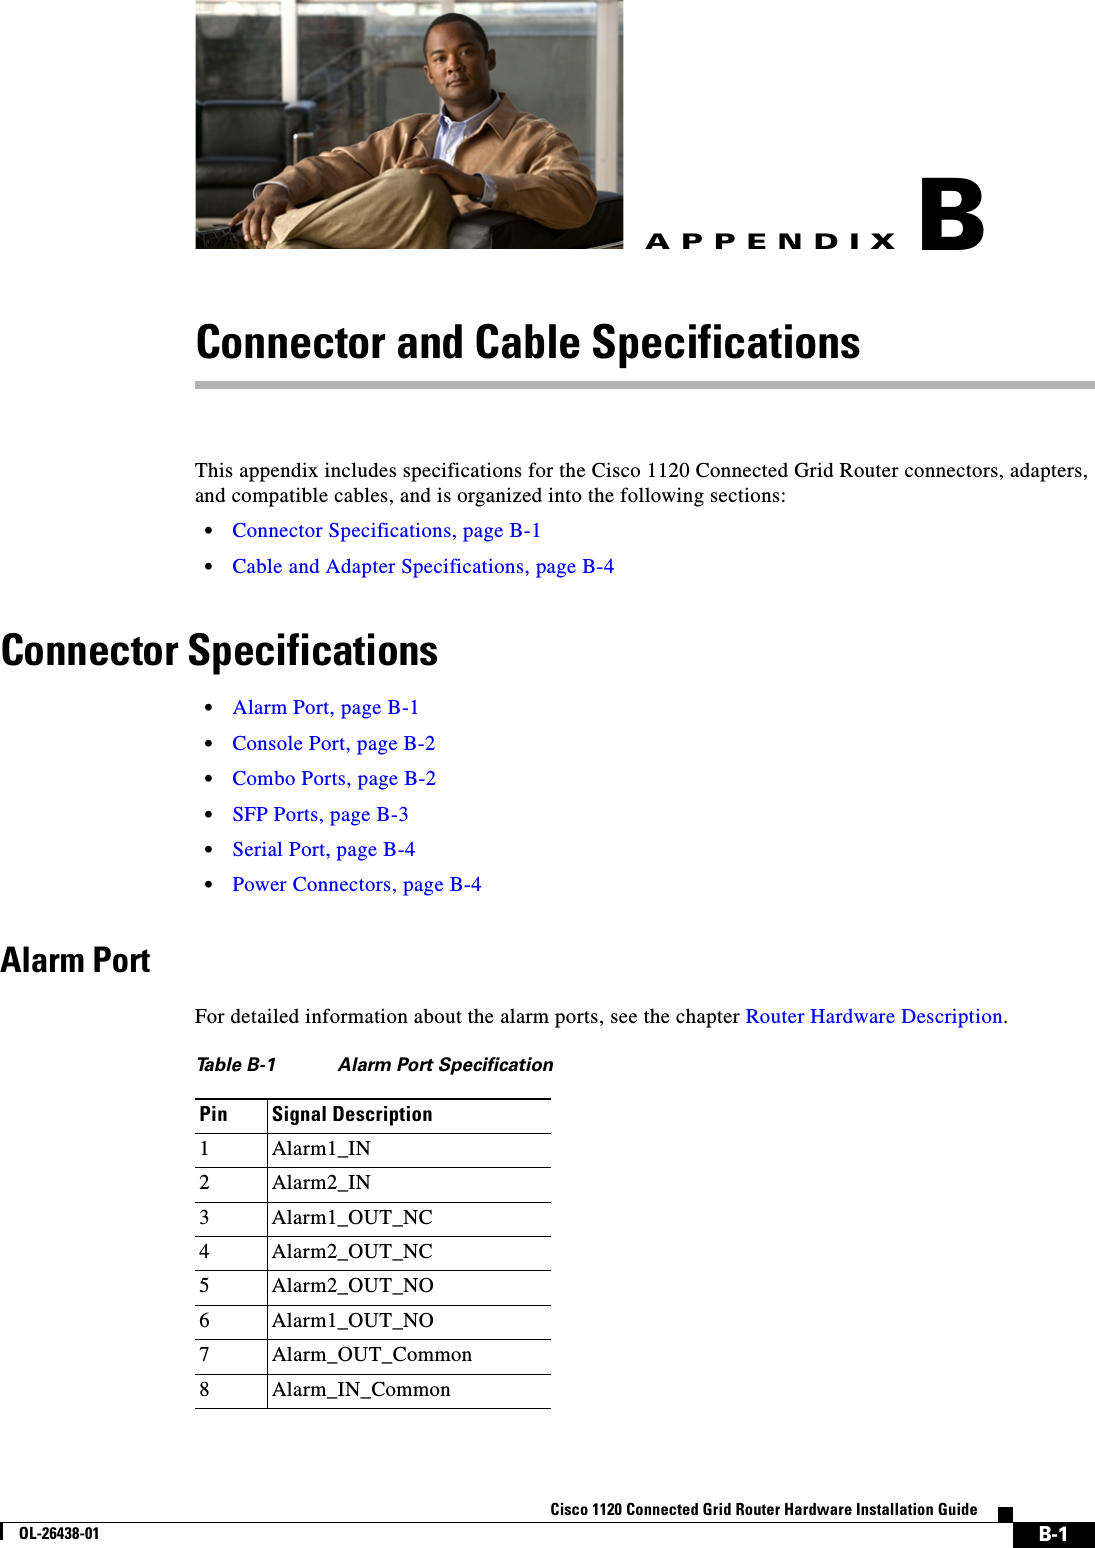  B-1Cisco 1120 Connected Grid Router Hardware Installation GuideOL-26438-01APPENDIXBConnector and Cable SpecificationsThis appendix includes specifications for the Cisco 1120 Connected Grid Router connectors, adapters, and compatible cables, and is organized into the following sections:•Connector Specifications, page B-1•Cable and Adapter Specifications, page B-4Connector Specifications•Alarm Port, page B-1•Console Port, page B-2•Combo Ports, page B-2•SFP Ports, page B-3•Serial Port, page B-4•Power Connectors, page B-4Alarm PortFor detailed information about the alarm ports, see the chapter Router Hardware Description.Table B-1 Alarm Port SpecificationPin Signal Description 1 Alarm1_IN2 Alarm2_IN3 Alarm1_OUT_NC4 Alarm2_OUT_NC5 Alarm2_OUT_NO6 Alarm1_OUT_NO7 Alarm_OUT_Common8 Alarm_IN_Common